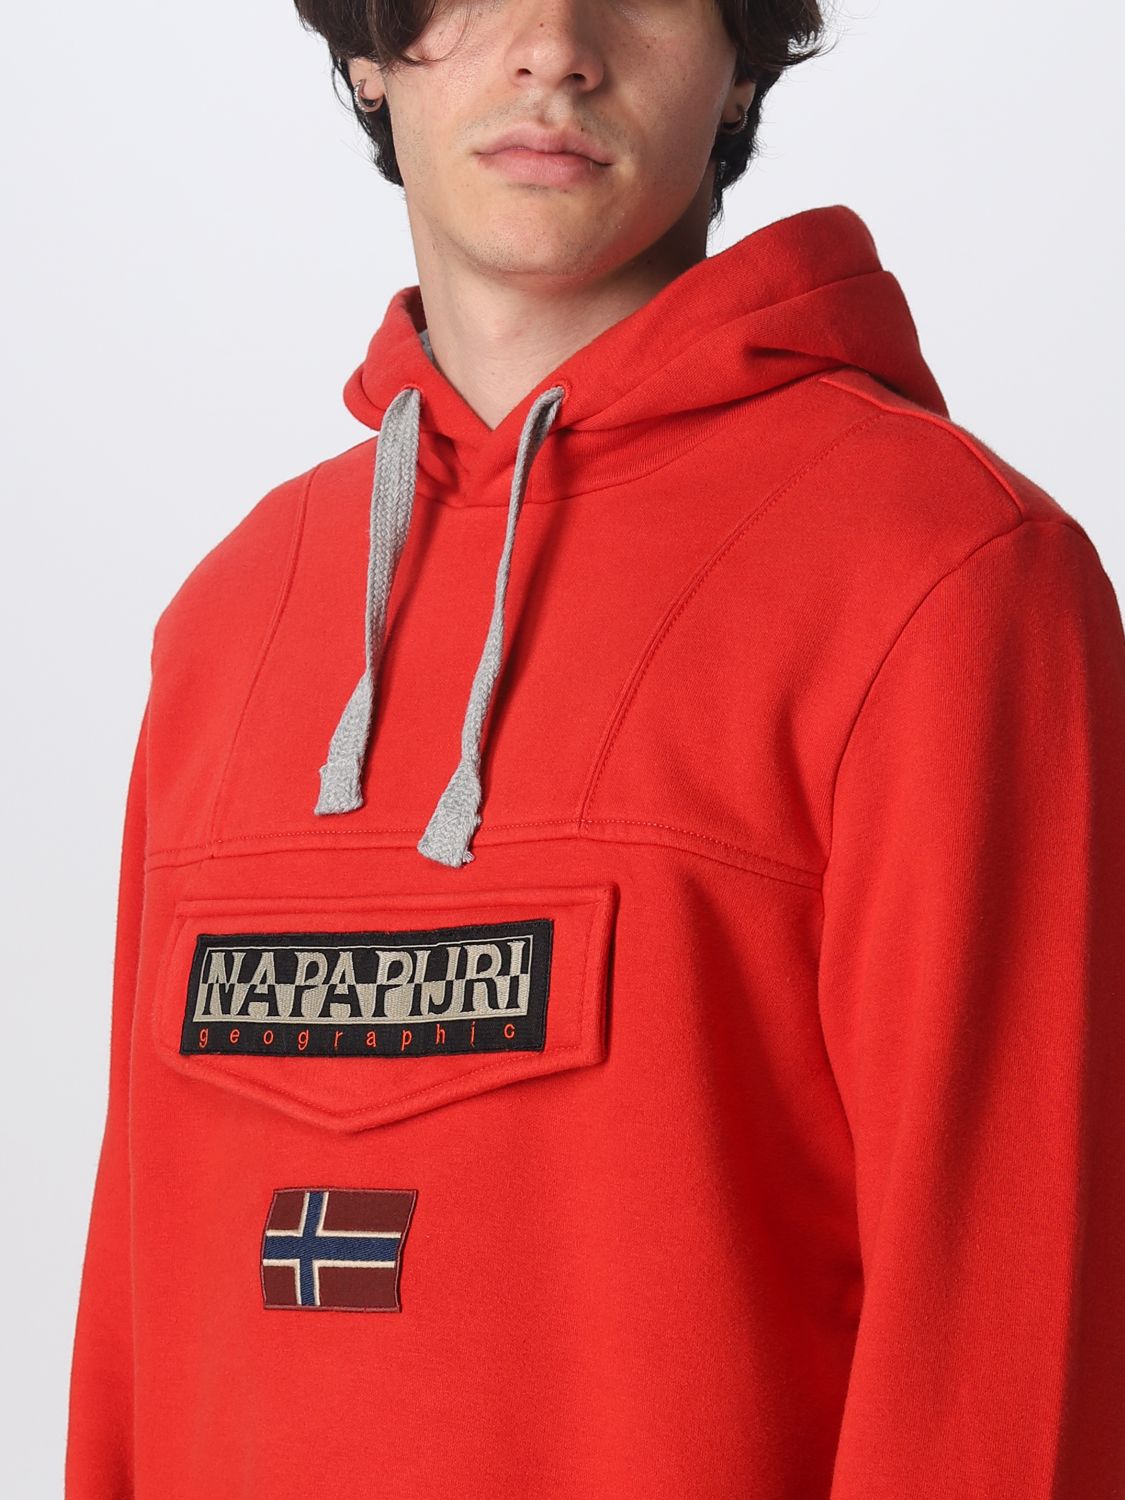 Sweatshirt Napapijri: Sweatshirt Napapijri homme rouge 3